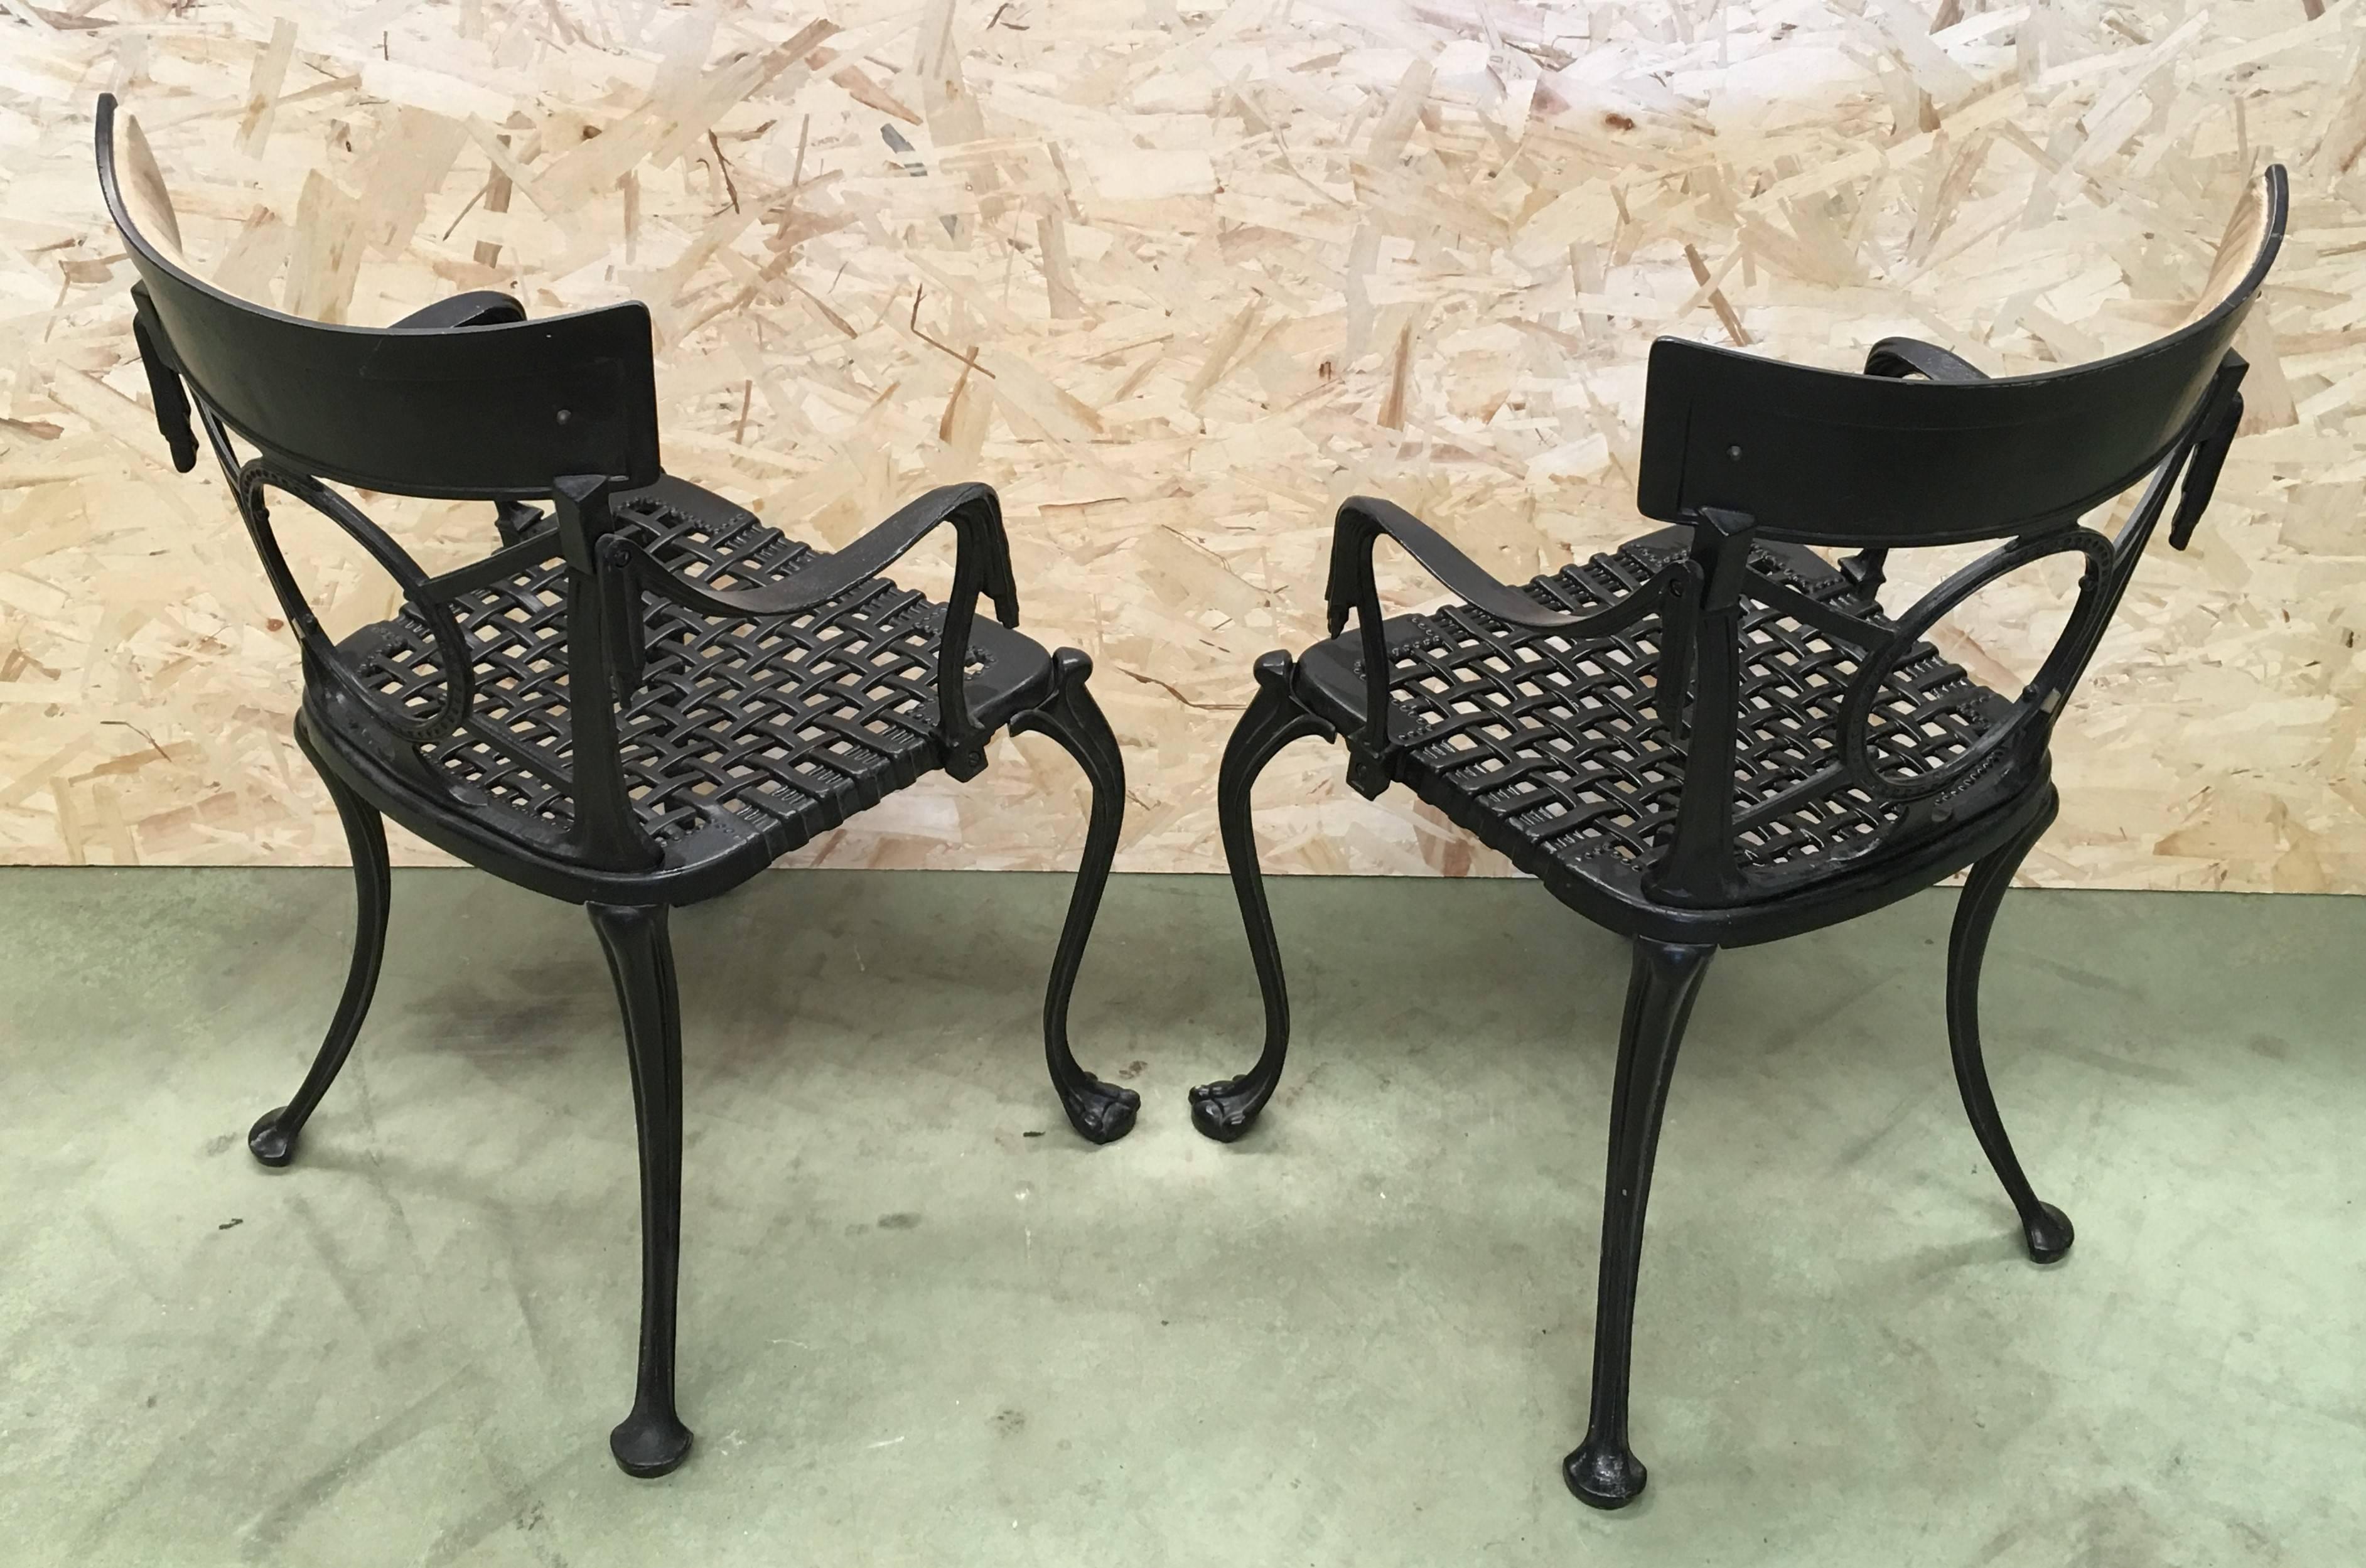 French Provincial 19th Century Pair of Antique French Cast Iron Garden Chairs in Black